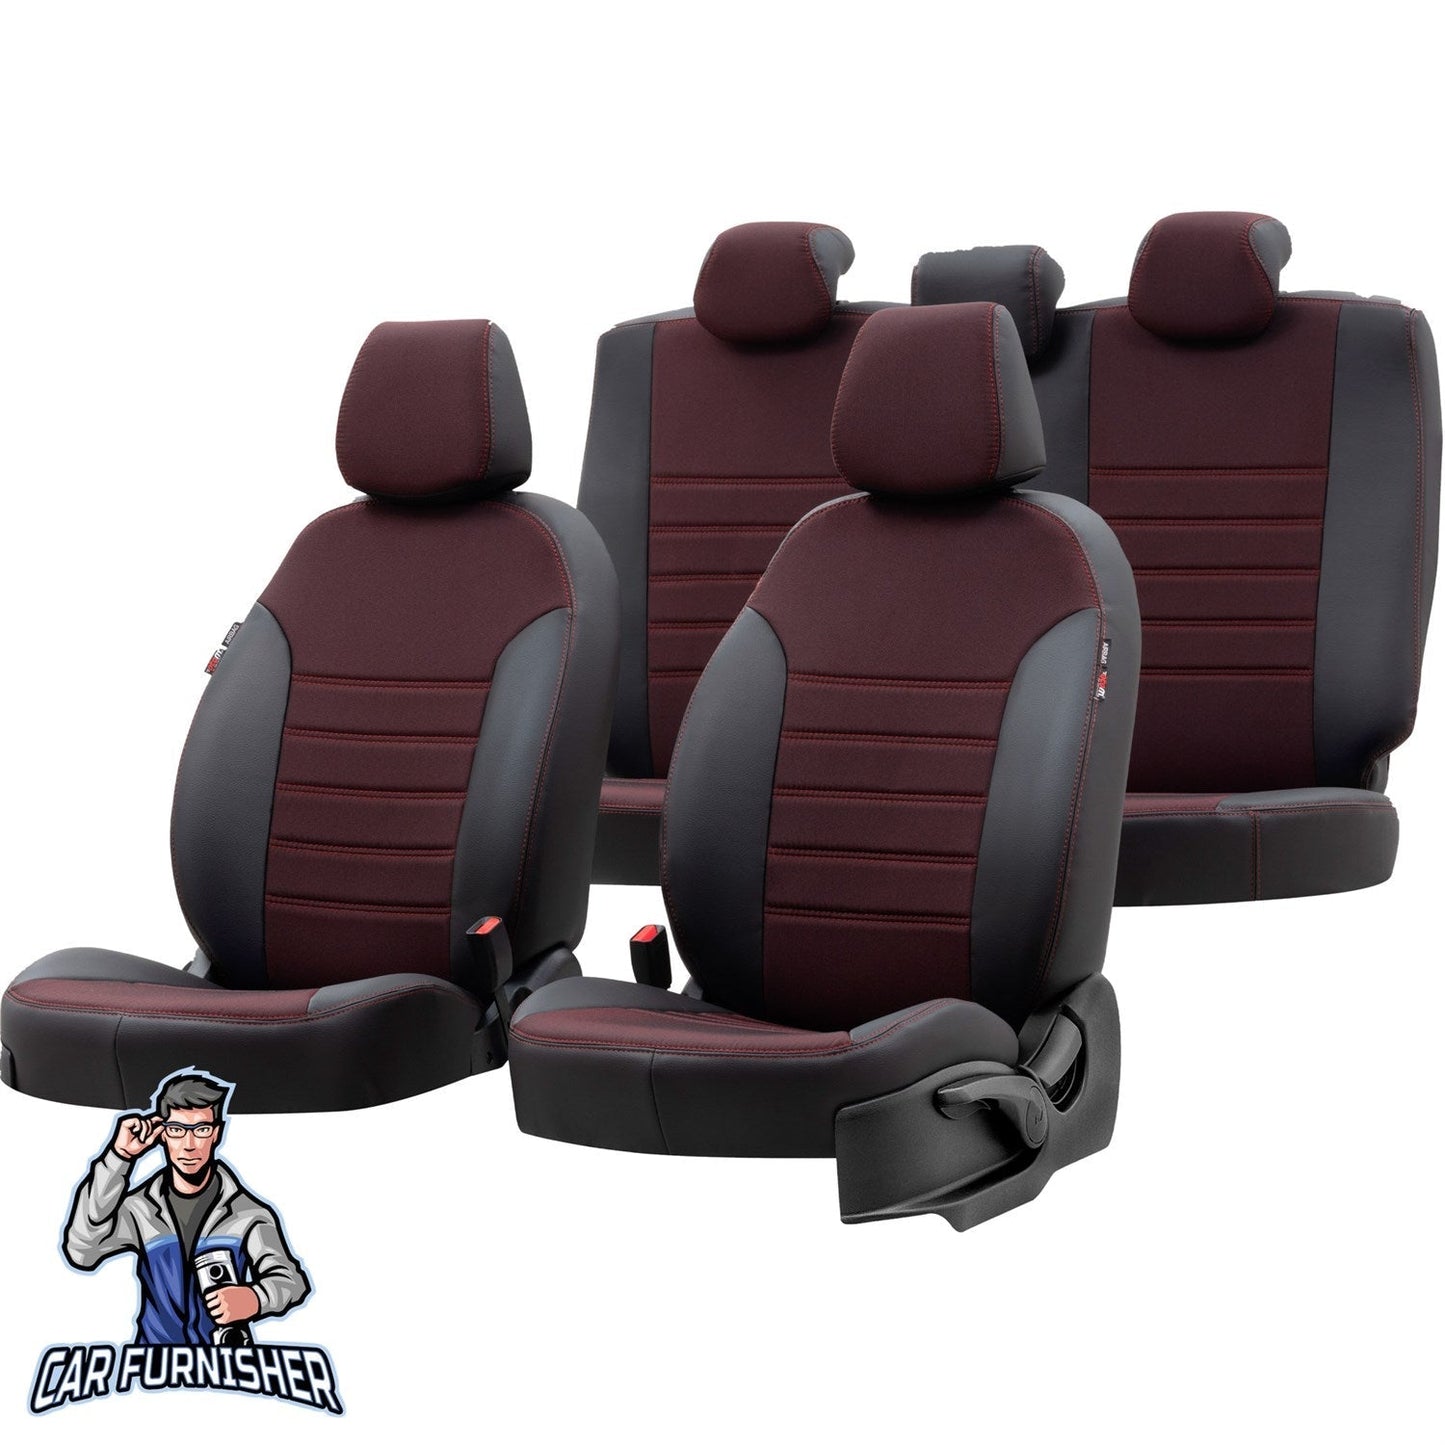 Peugeot Expert Seat Covers Paris Leather & Jacquard Design Red Leather & Jacquard Fabric